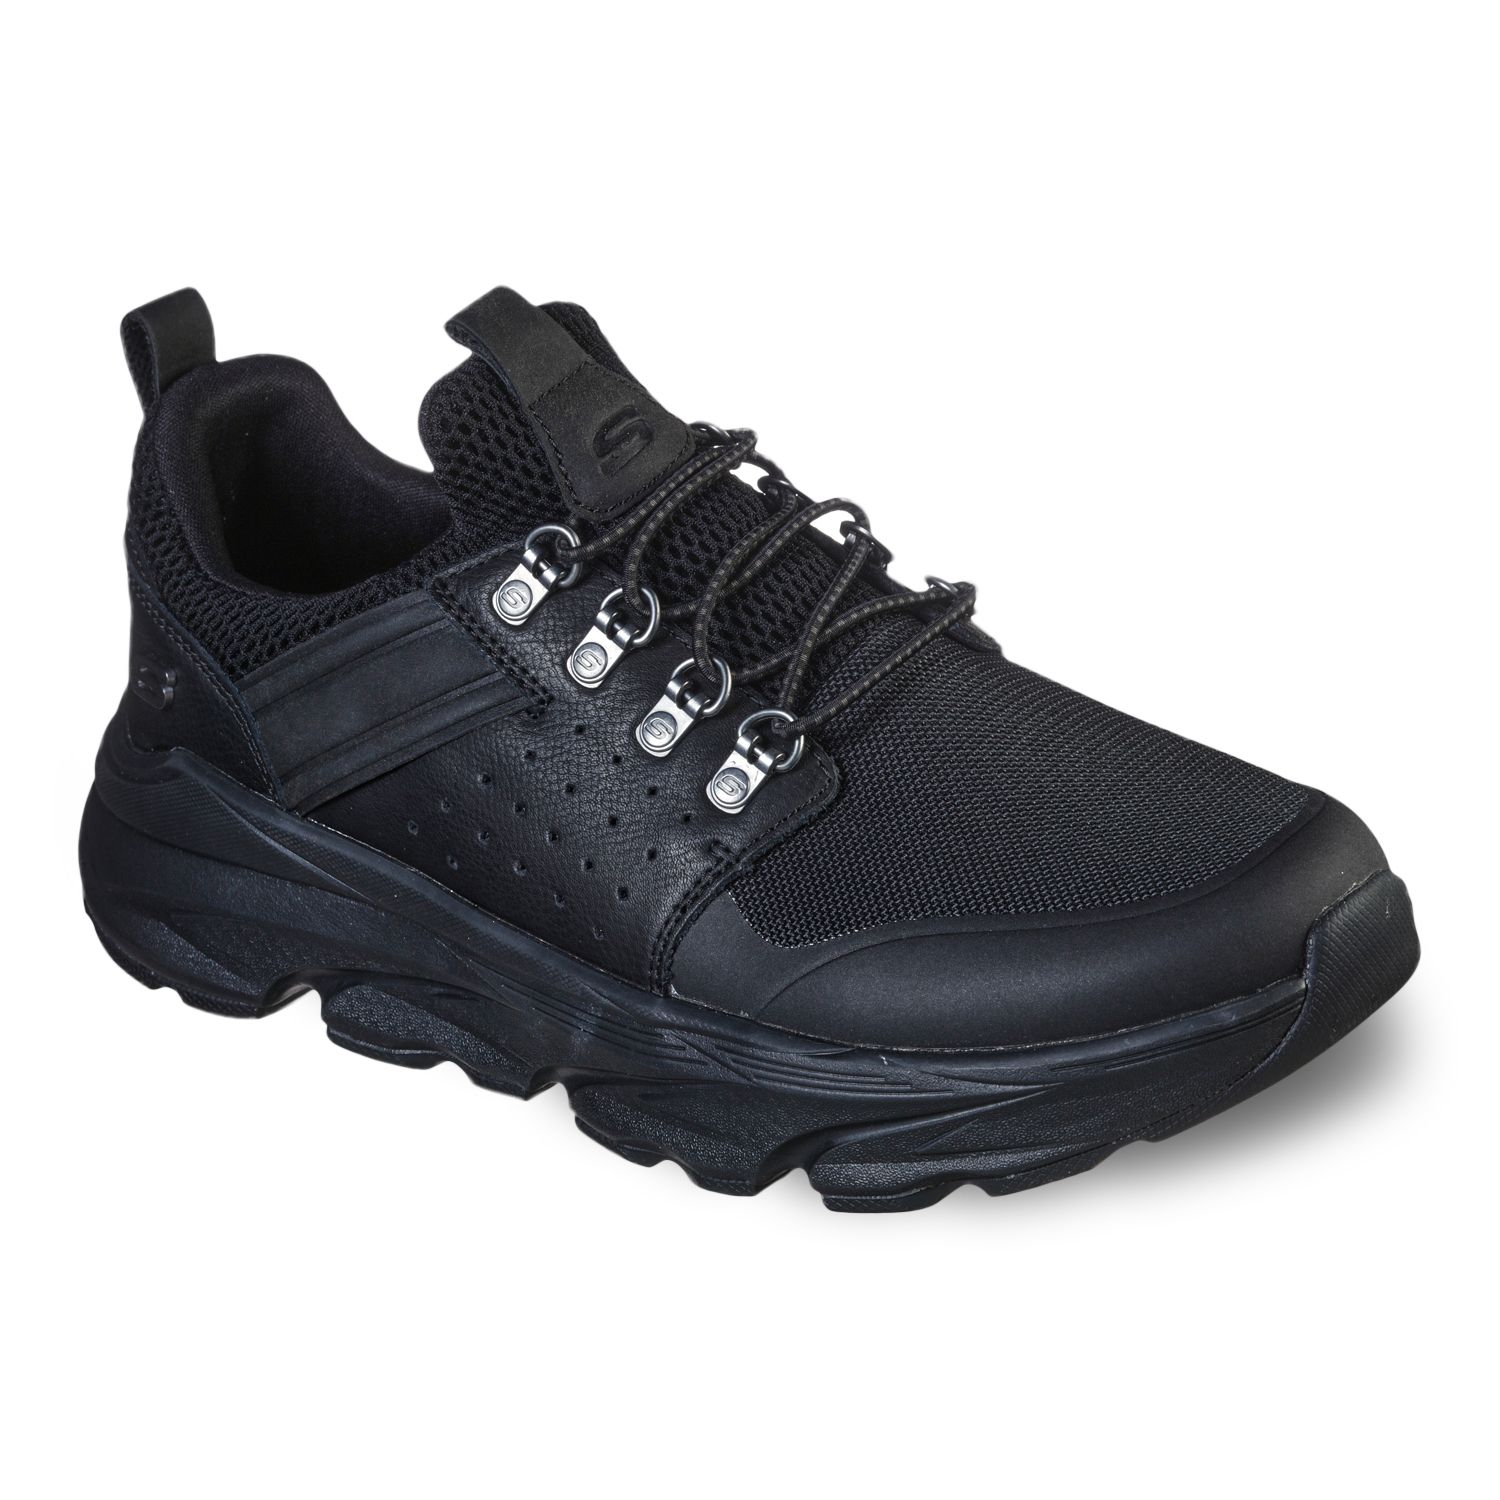 skechers relaxed fit men's shoes